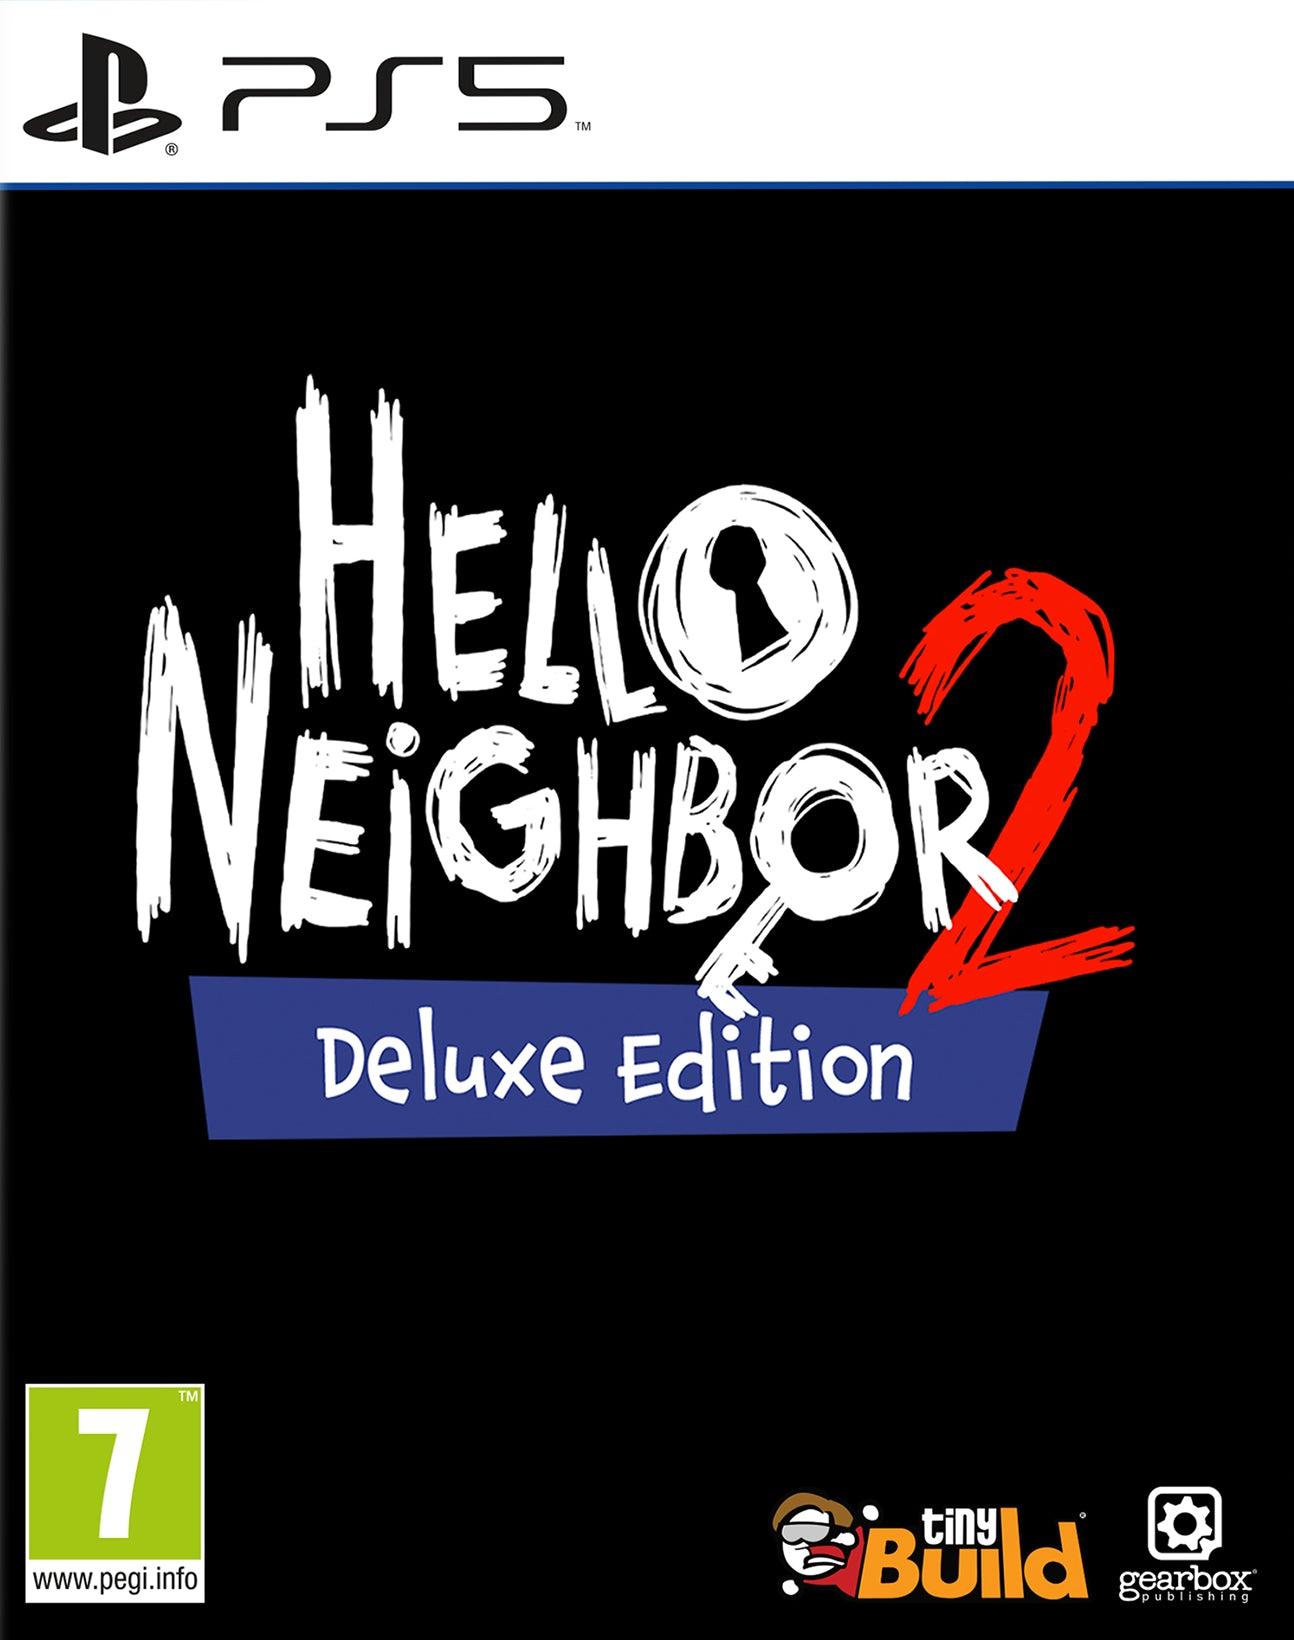 Hello Neighbor 2 Deluxe Ed - Want a New Gadget